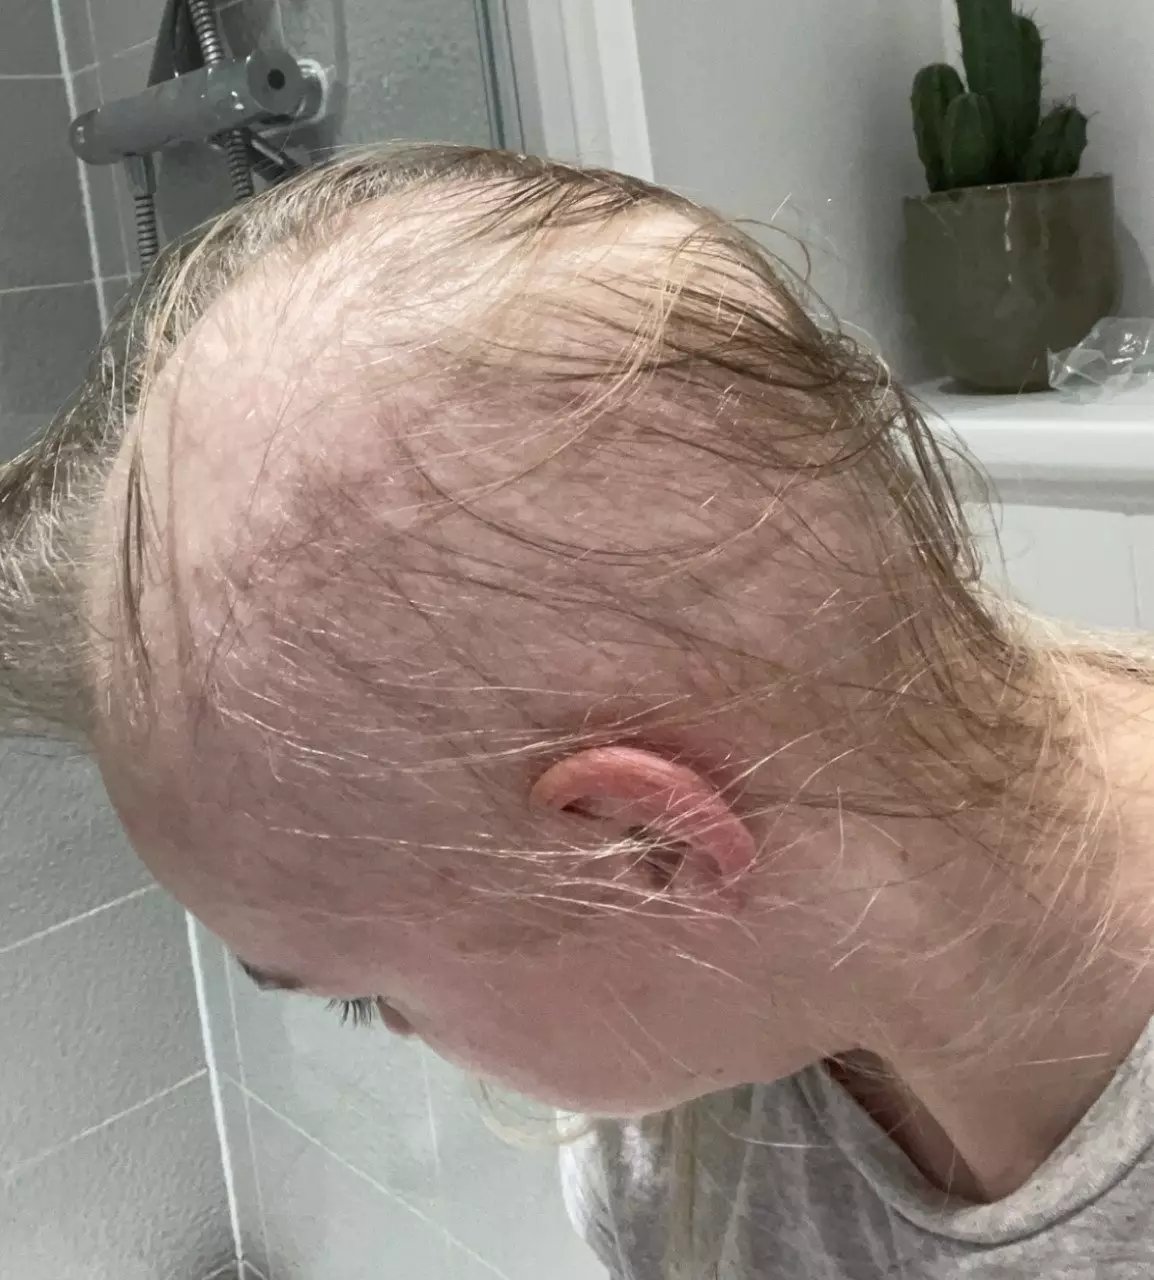 Sophie only had wispy strands before shaving her head (